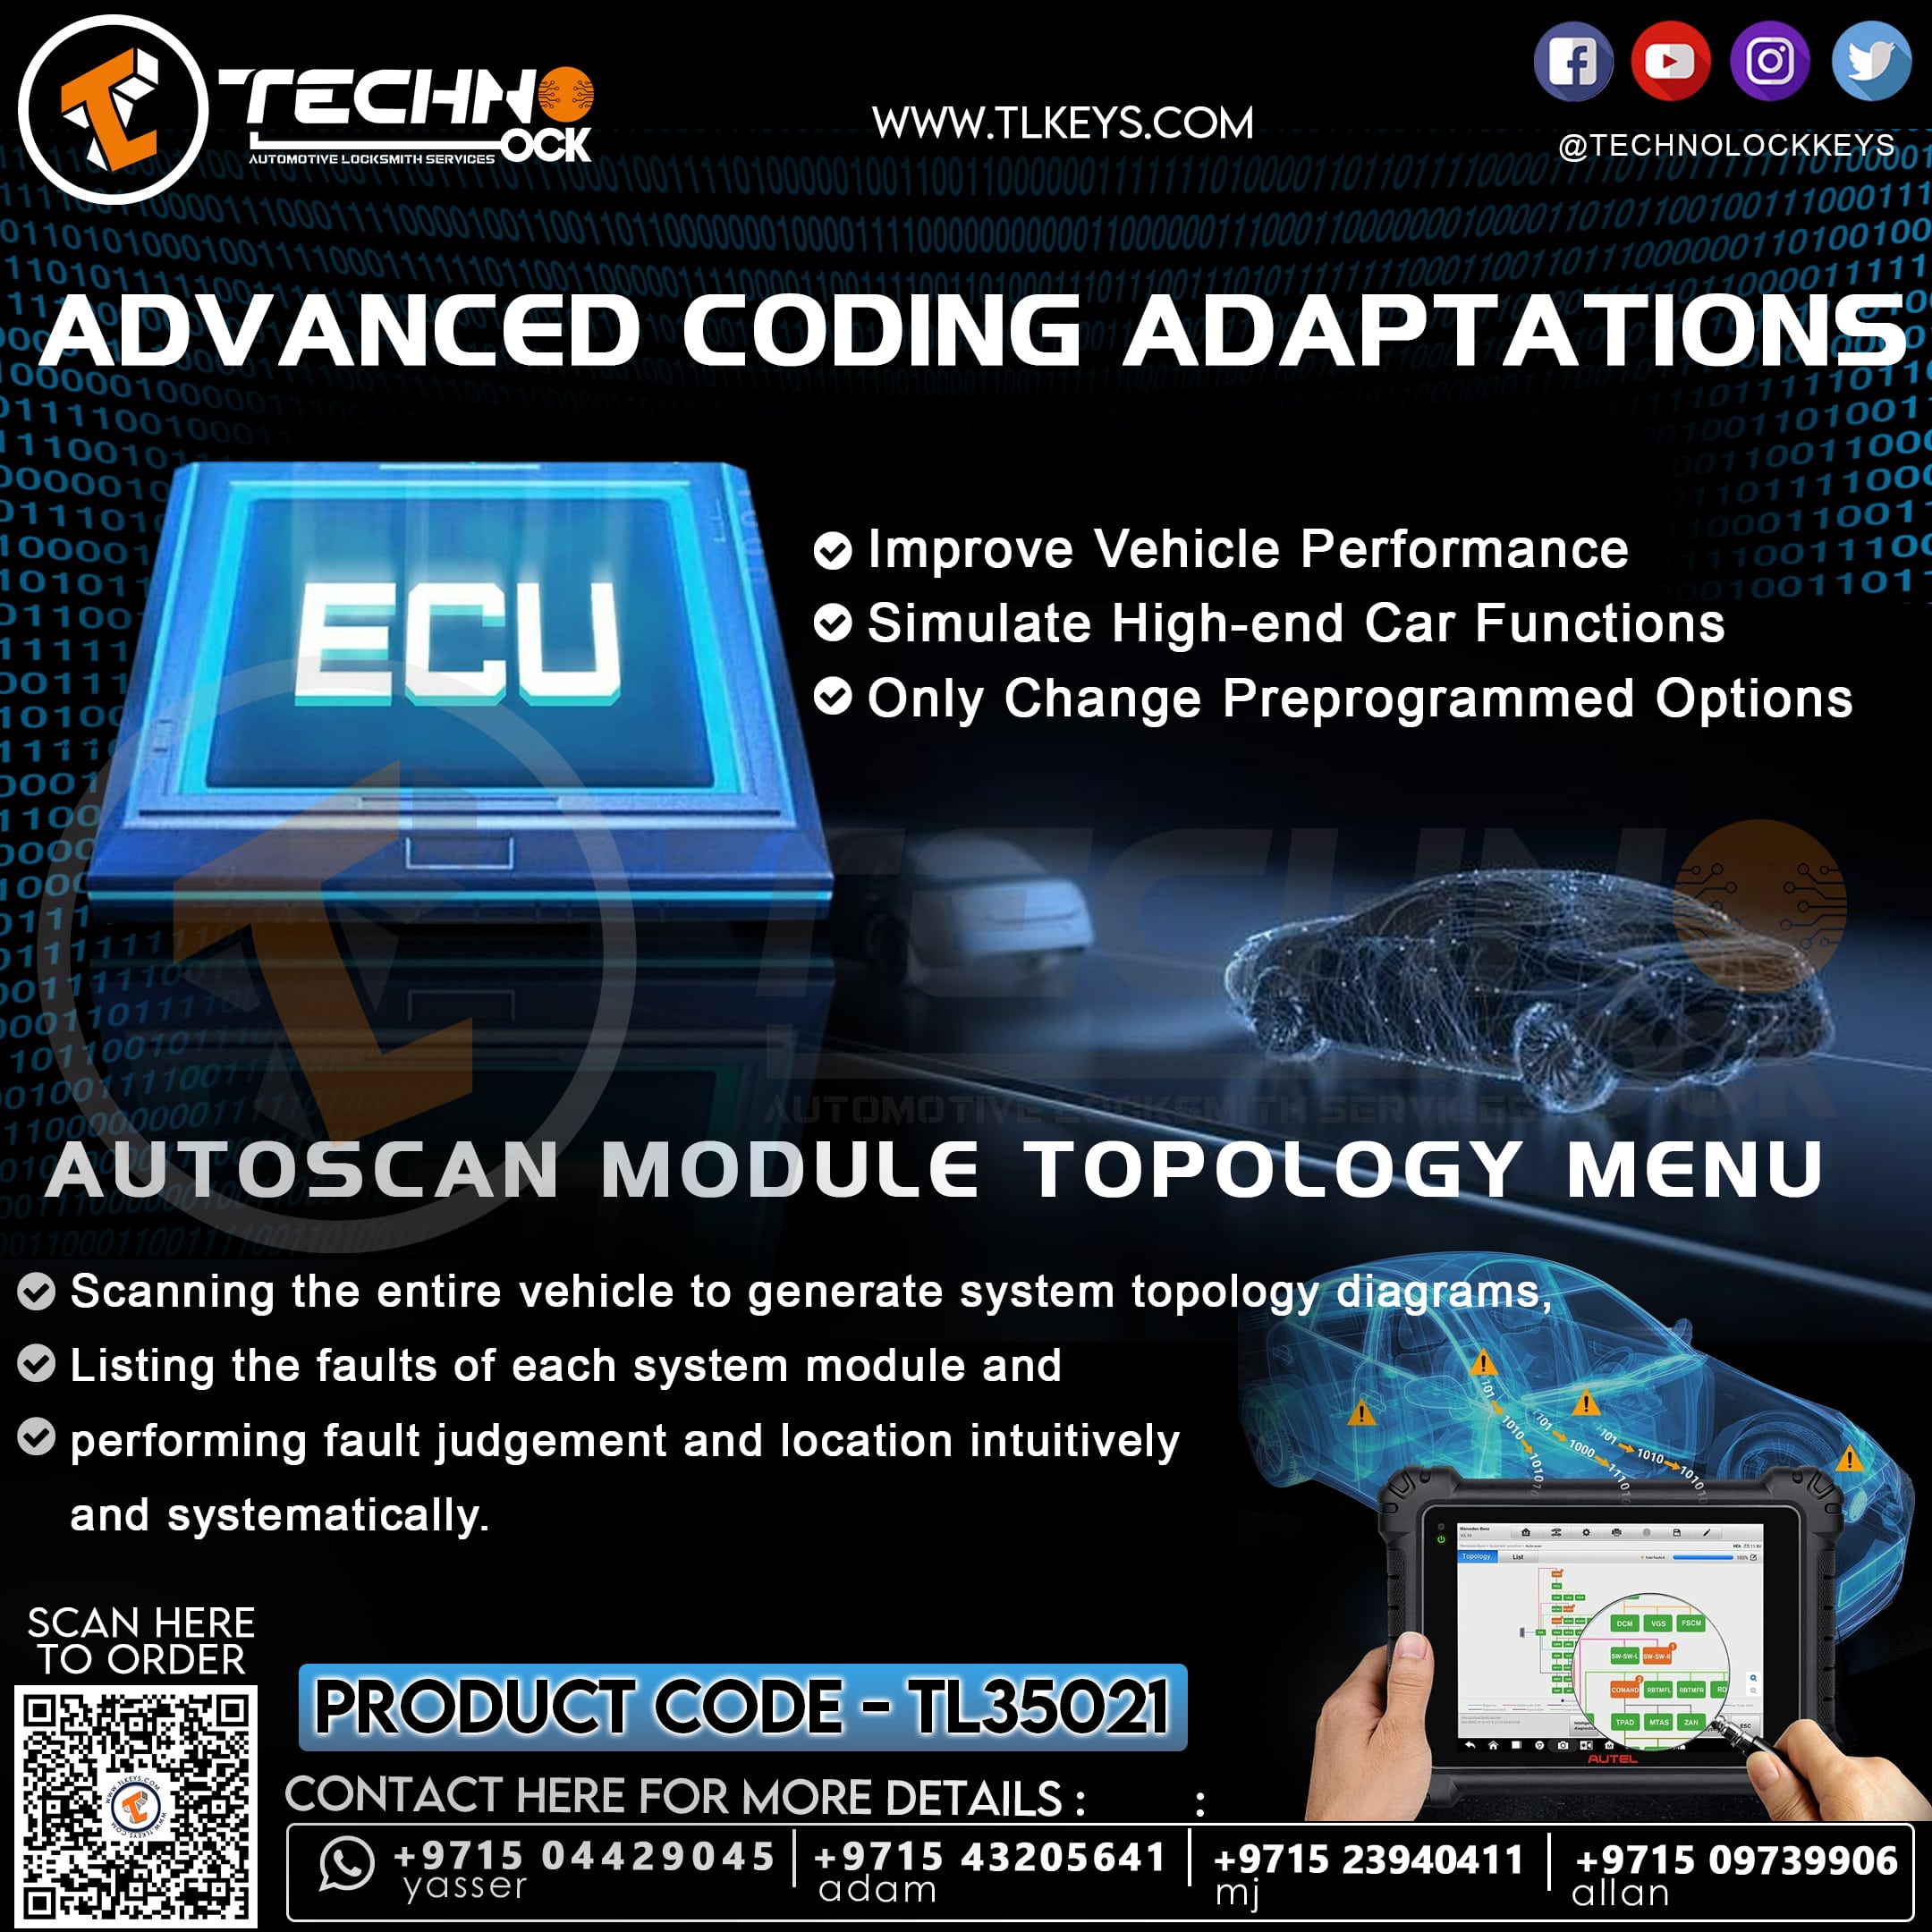  services to advanced ECU coding and programming